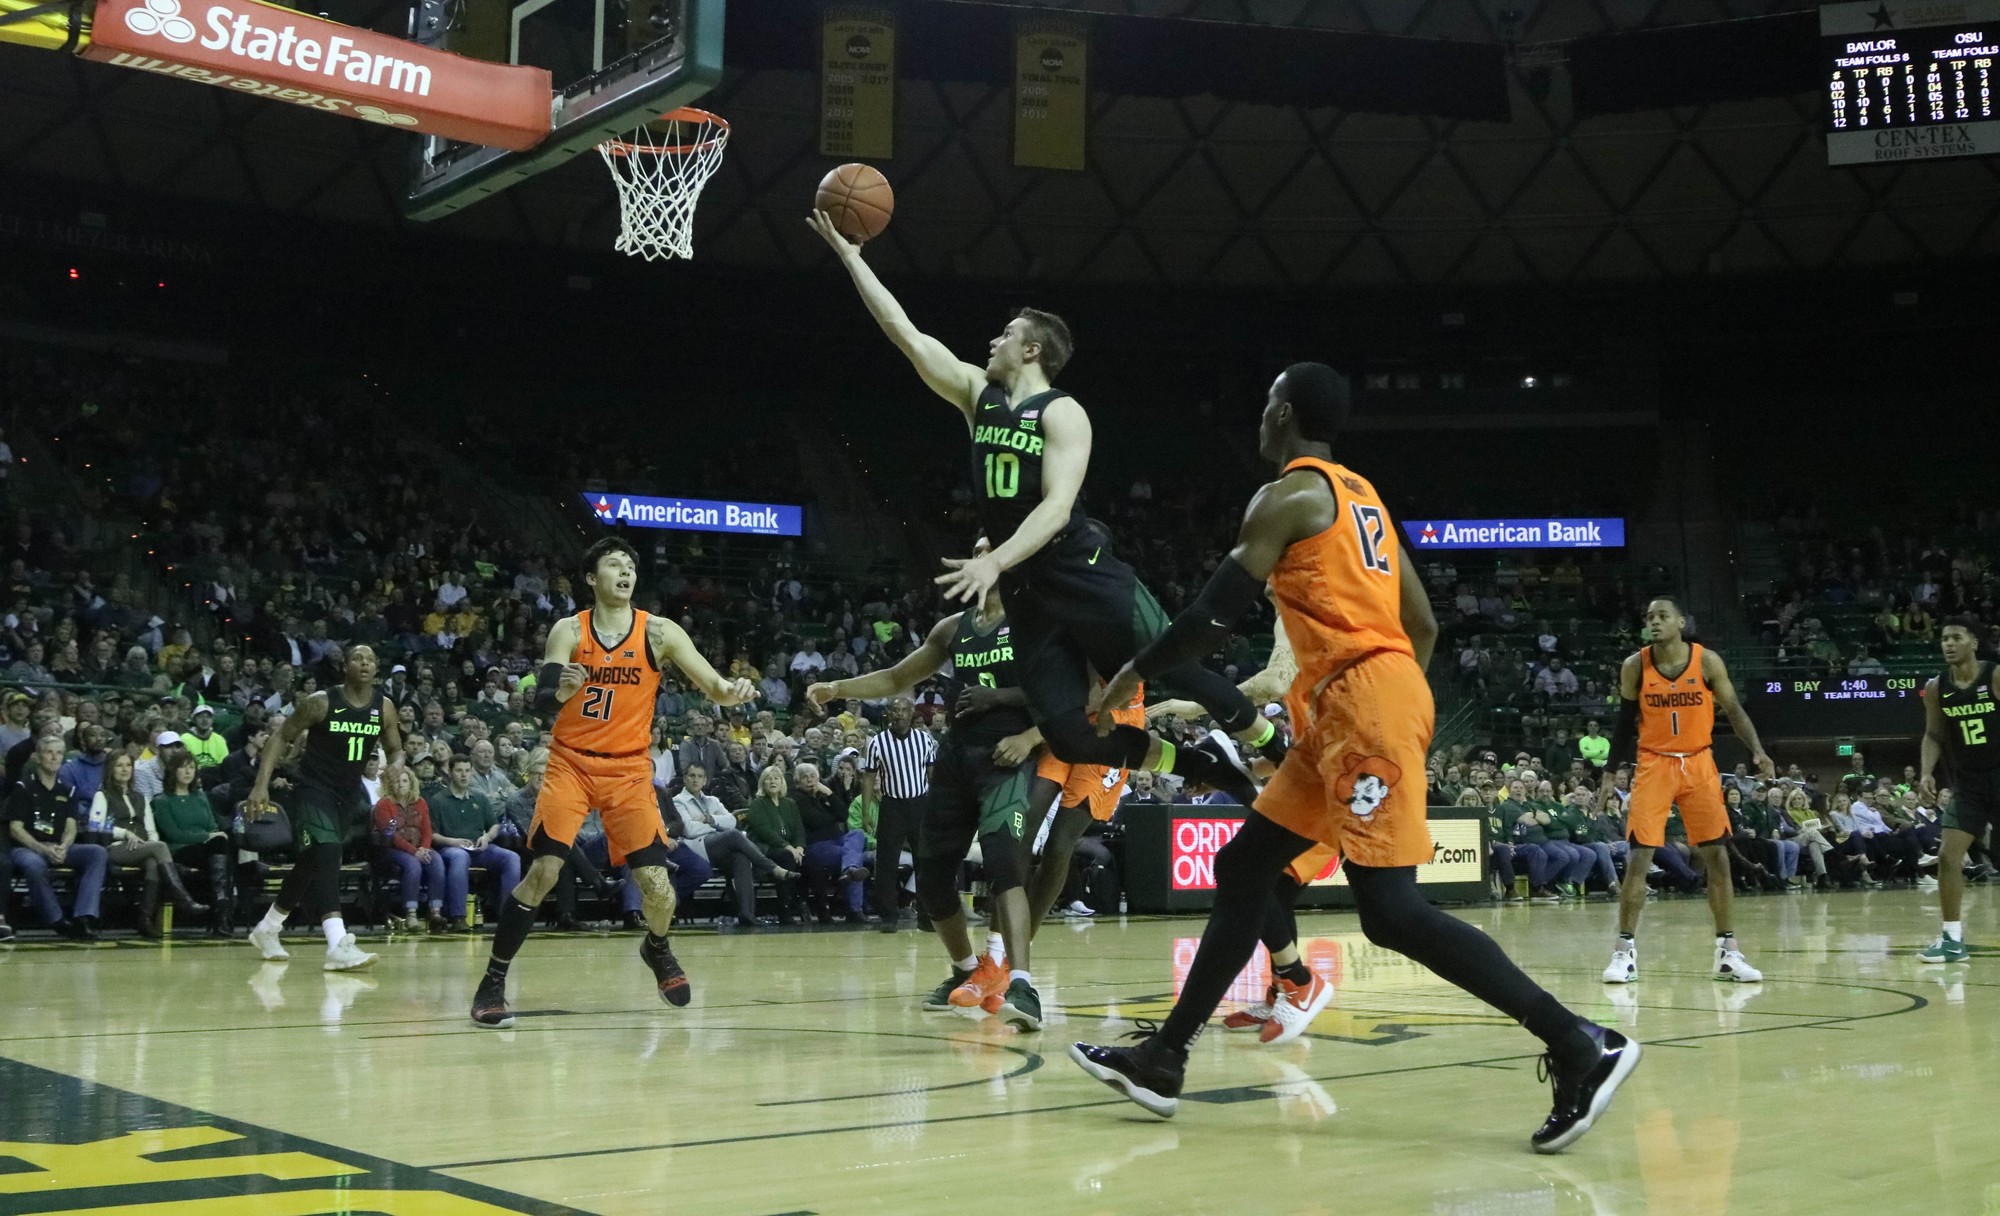 Baylor men’s basketball earns No. 9 seed in NCAA Tournament | The Baylor Lariat